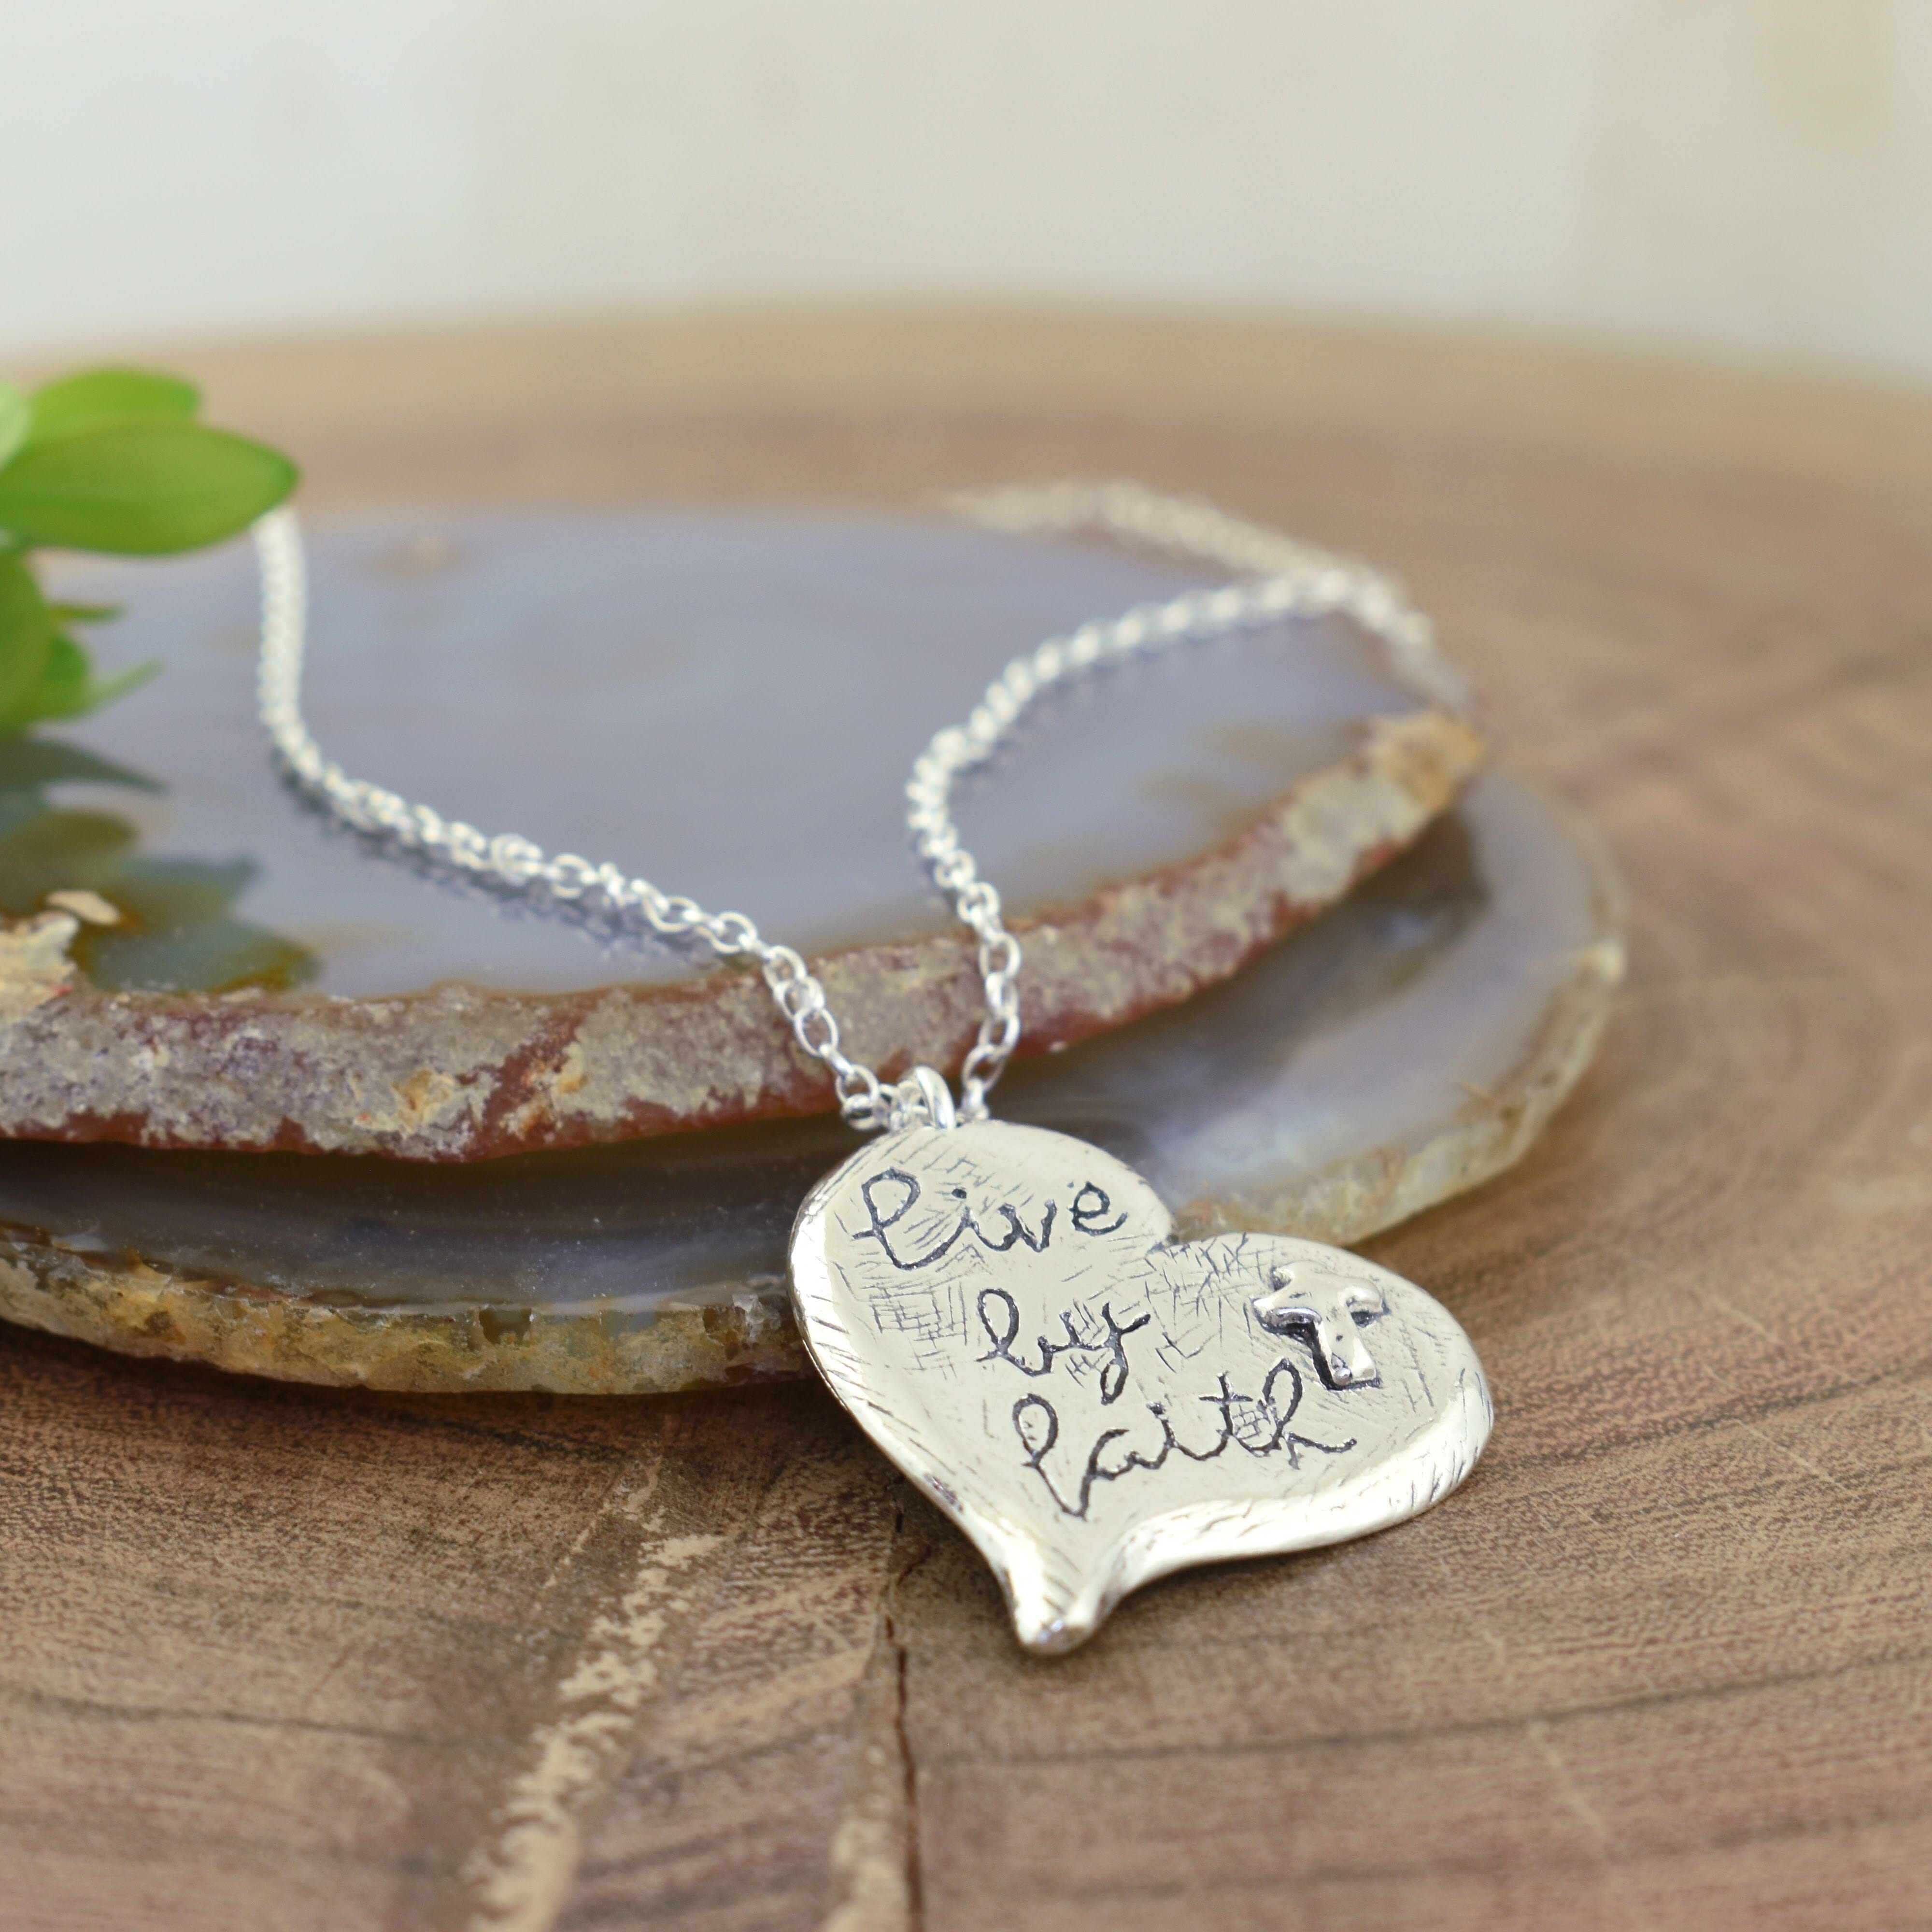 Sterling silver necklace engraved with words "Live By Faith"